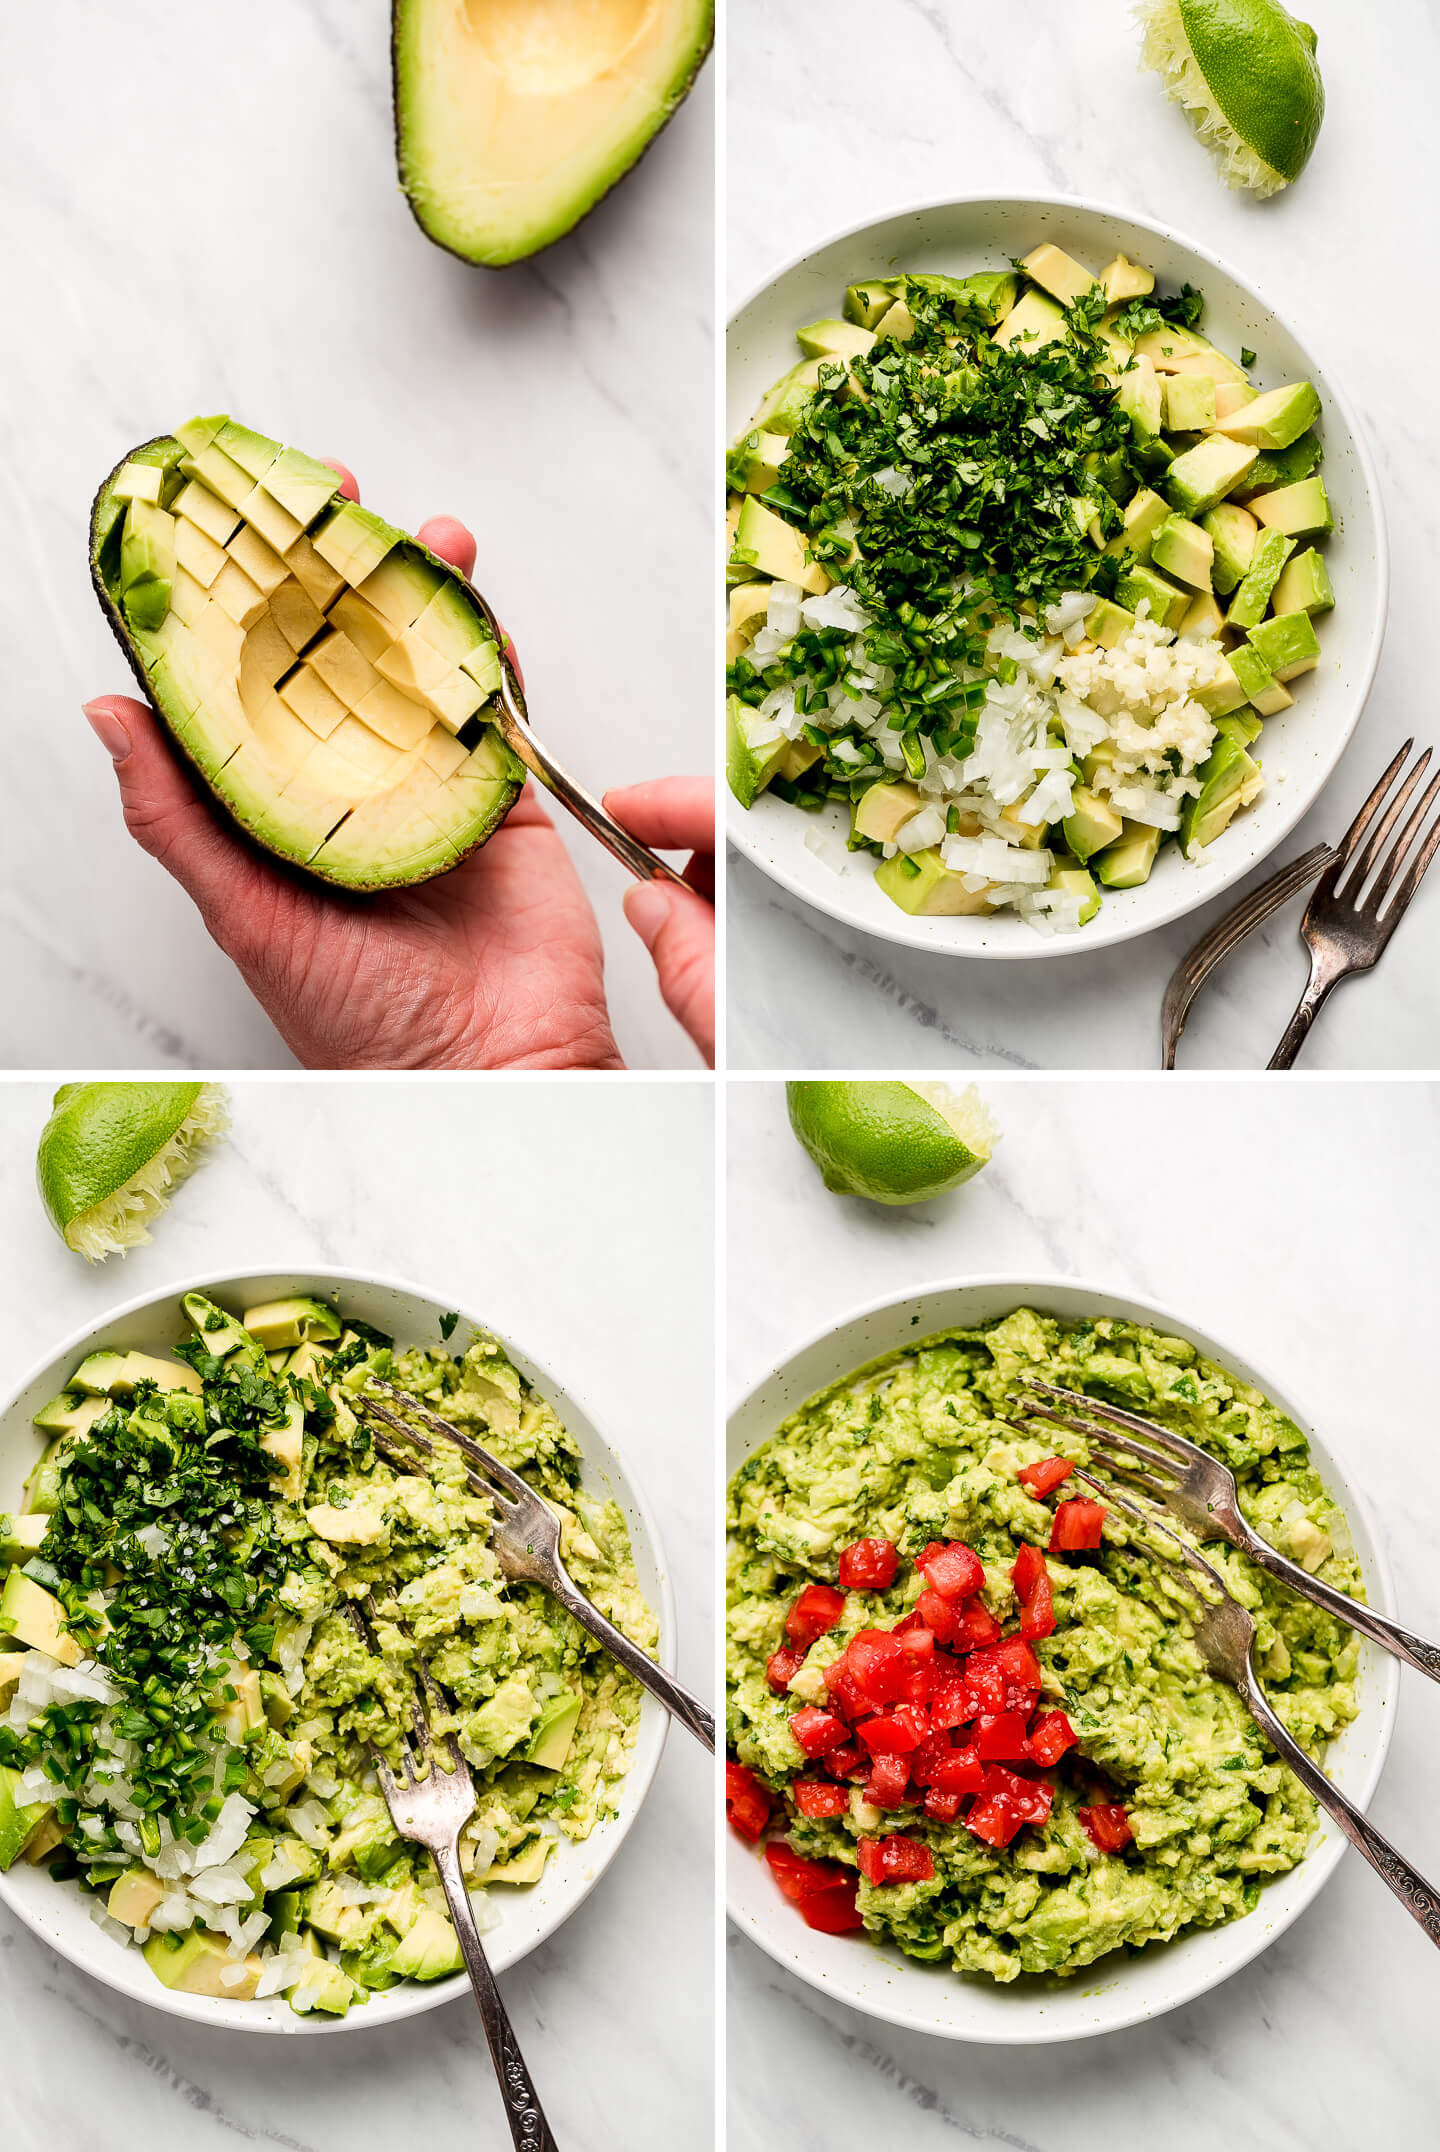 Process shots of making guacamole- scooping out avocado, adding cilantro, onion, garlic, lime, and tomatoes.